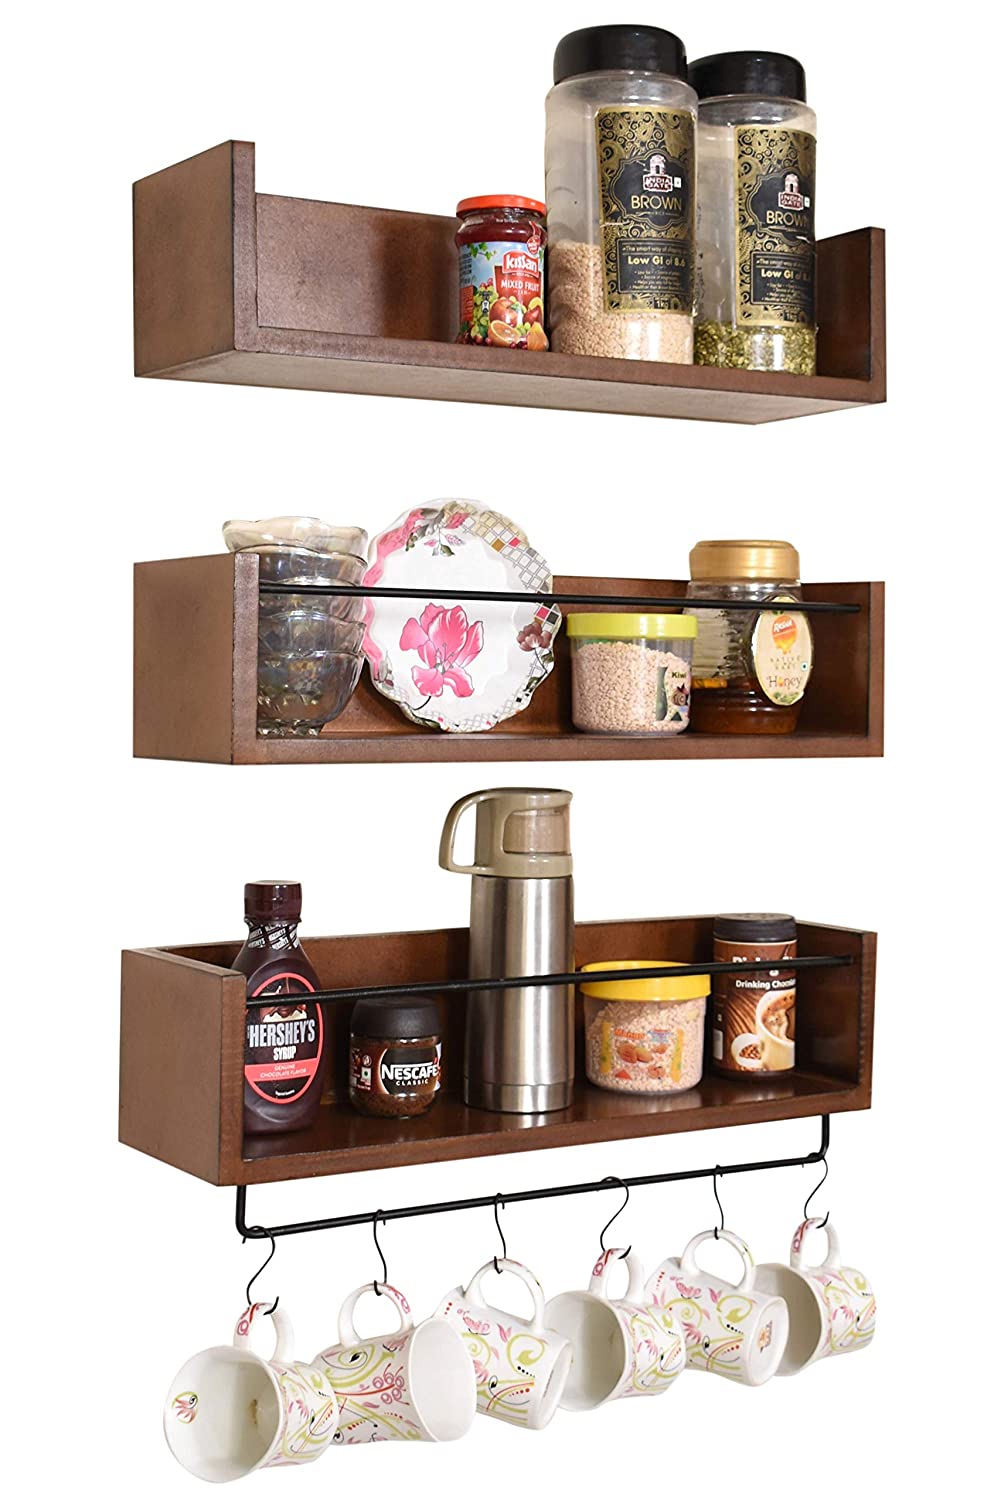 Wall Mount Floating Wall Shelves Kitchen Rack Shelf with Towel Holder Kitchen Organizer Dime Store